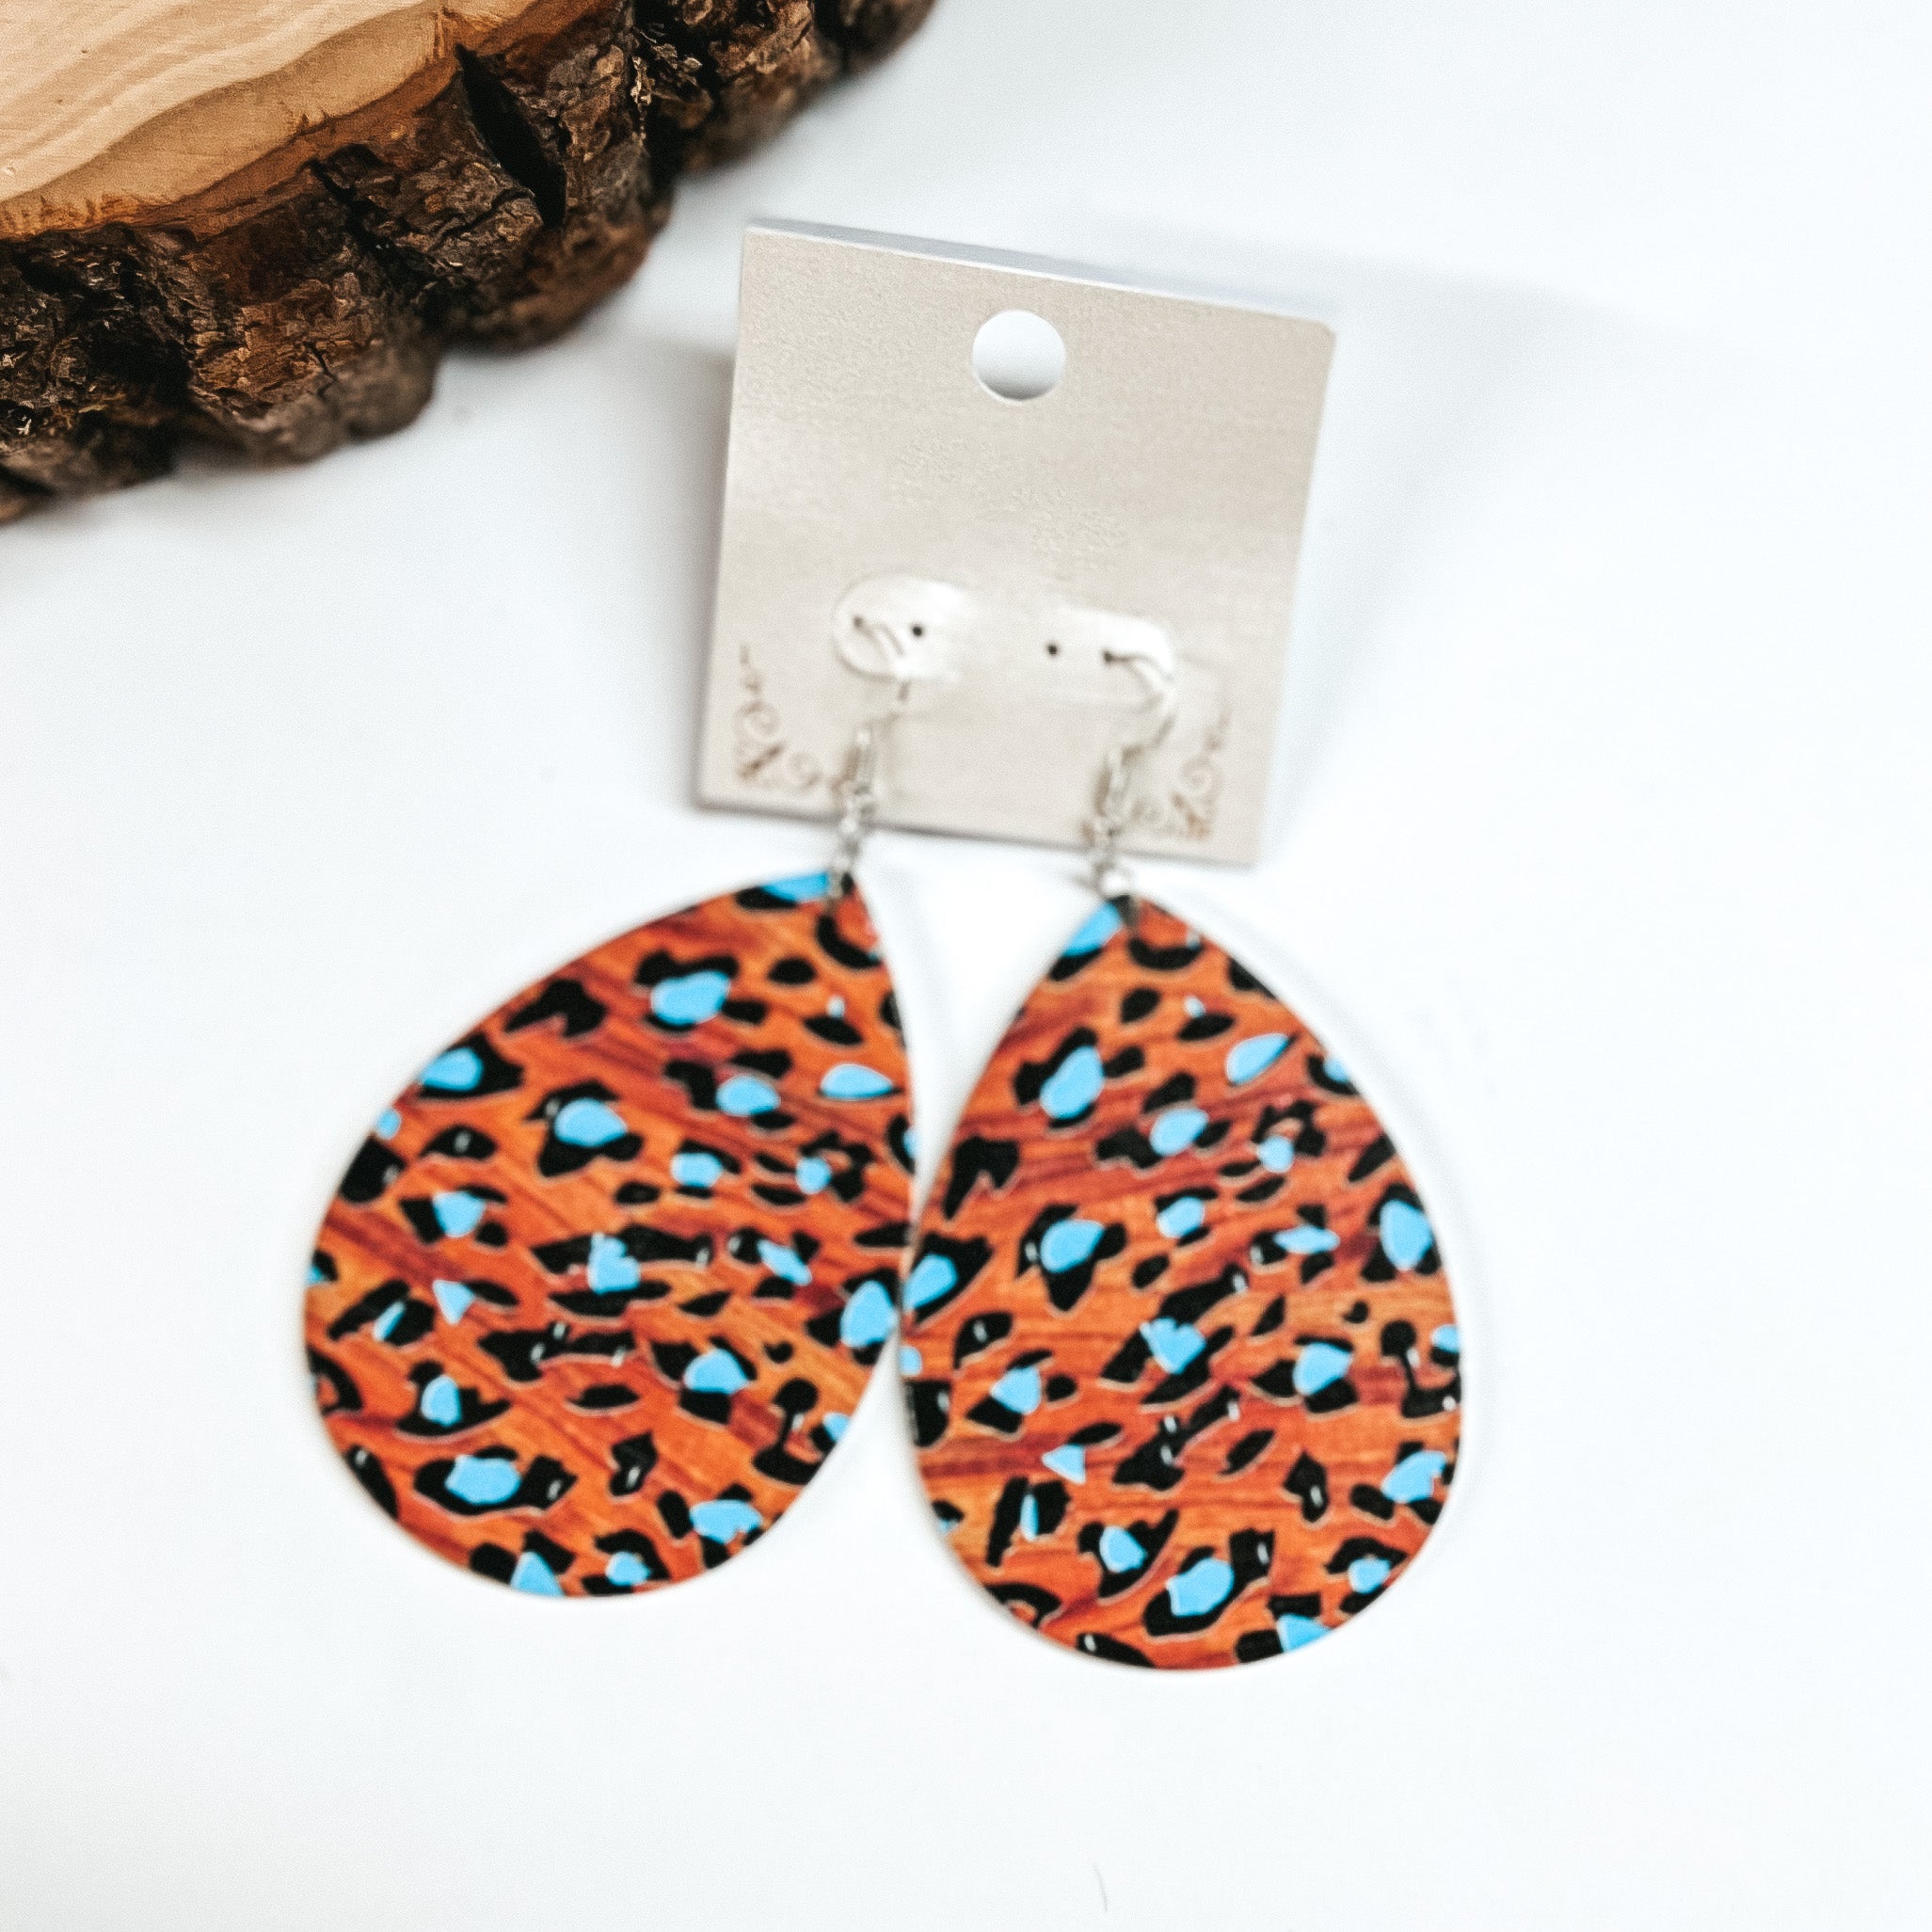 These are brown wooden teardrop earrings in leopard print and blue detailing. These earrings are placed on a white earring card holder, they are laying on a  white background with a slab of wood in the back as decor.